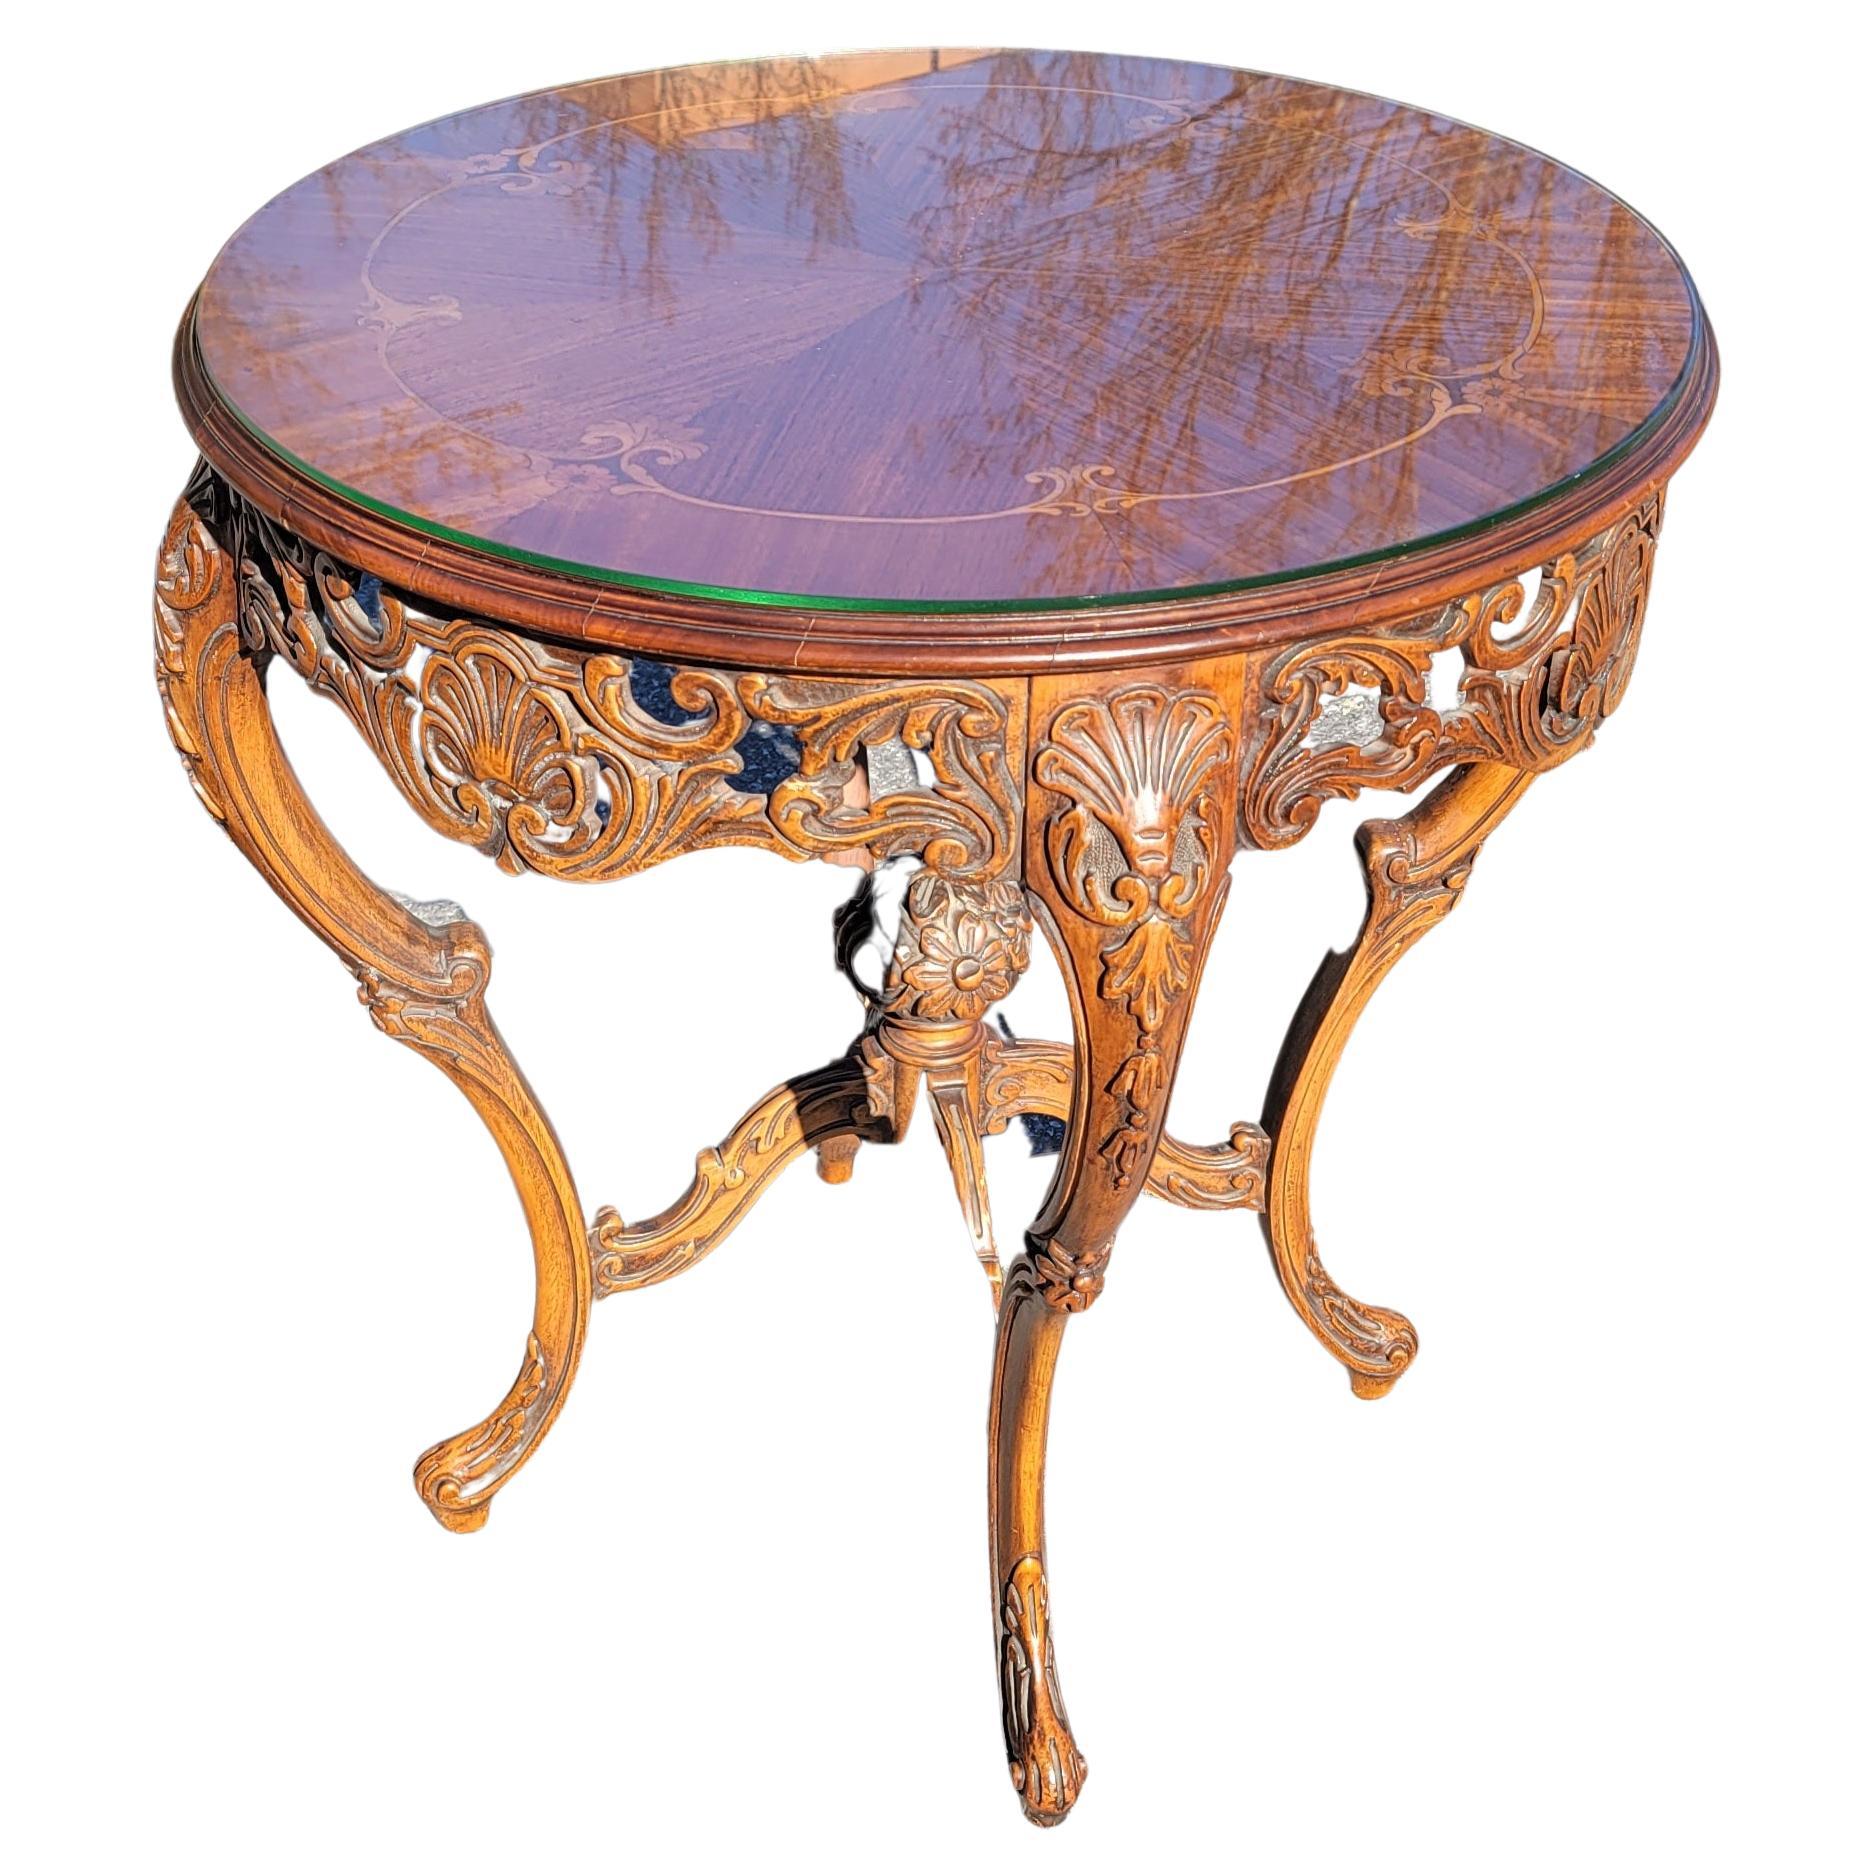 A French Court Galleries by Tonk Louis XVI Style Marquetry and Carved Mahogany Center Table with protective Glass Top.  Richly detailed Inlaid veneer top above a conforming apron with ornate scroll-carvings. Intricate carvings on apron  and cabriole